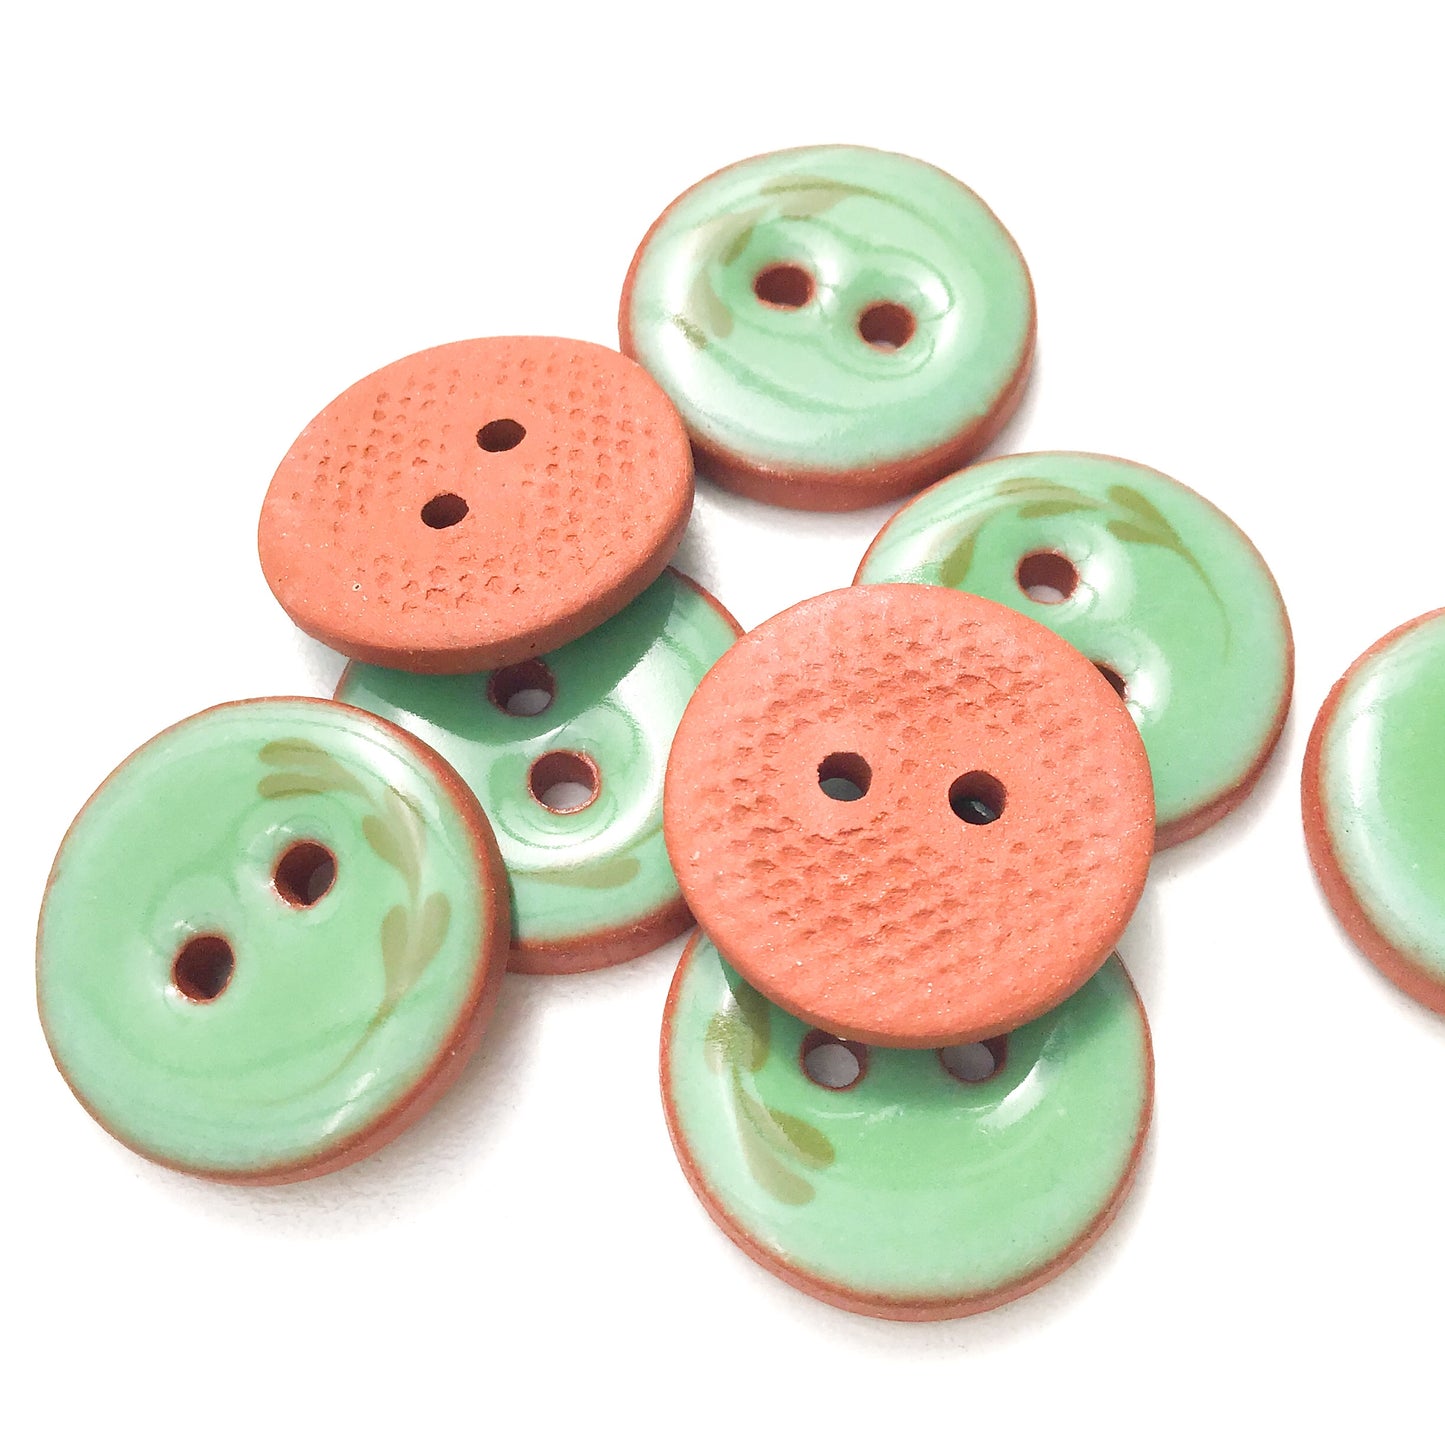 Green Ceramic Leaflet Buttons - Round Ceramic Buttons - 3/4" - 8 Pack